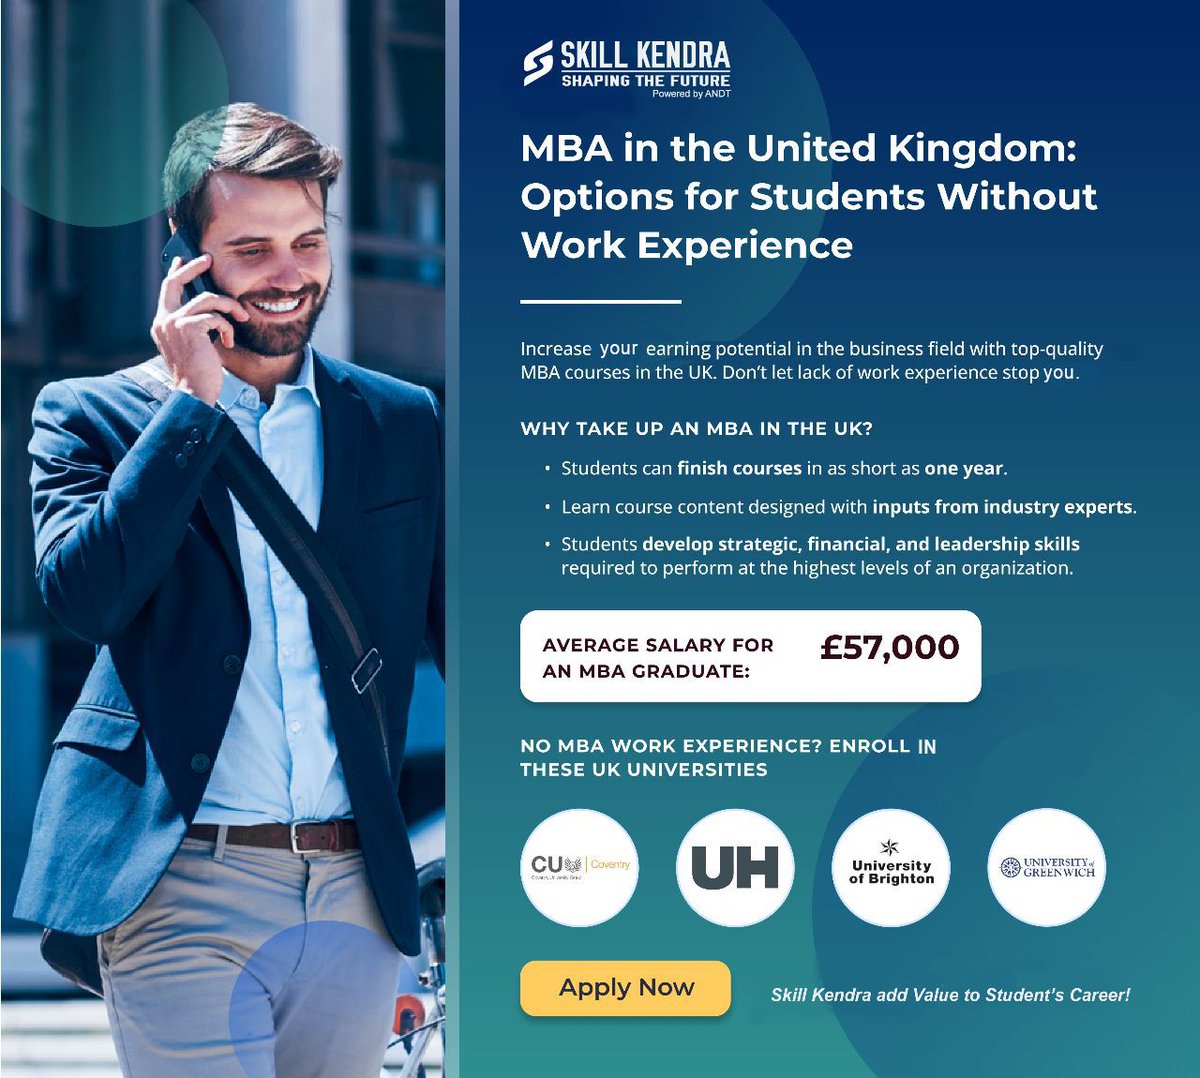 🌟Boost your #career with an #MBA in the United Kingdom! 🎓🇬🇧 Don't let lack of #work #experience hold you back from achieving your #dreams. #Explore the exciting options available for students without work experience in the UK

Call us at +91-9205363764 to get started
#MBAinUK